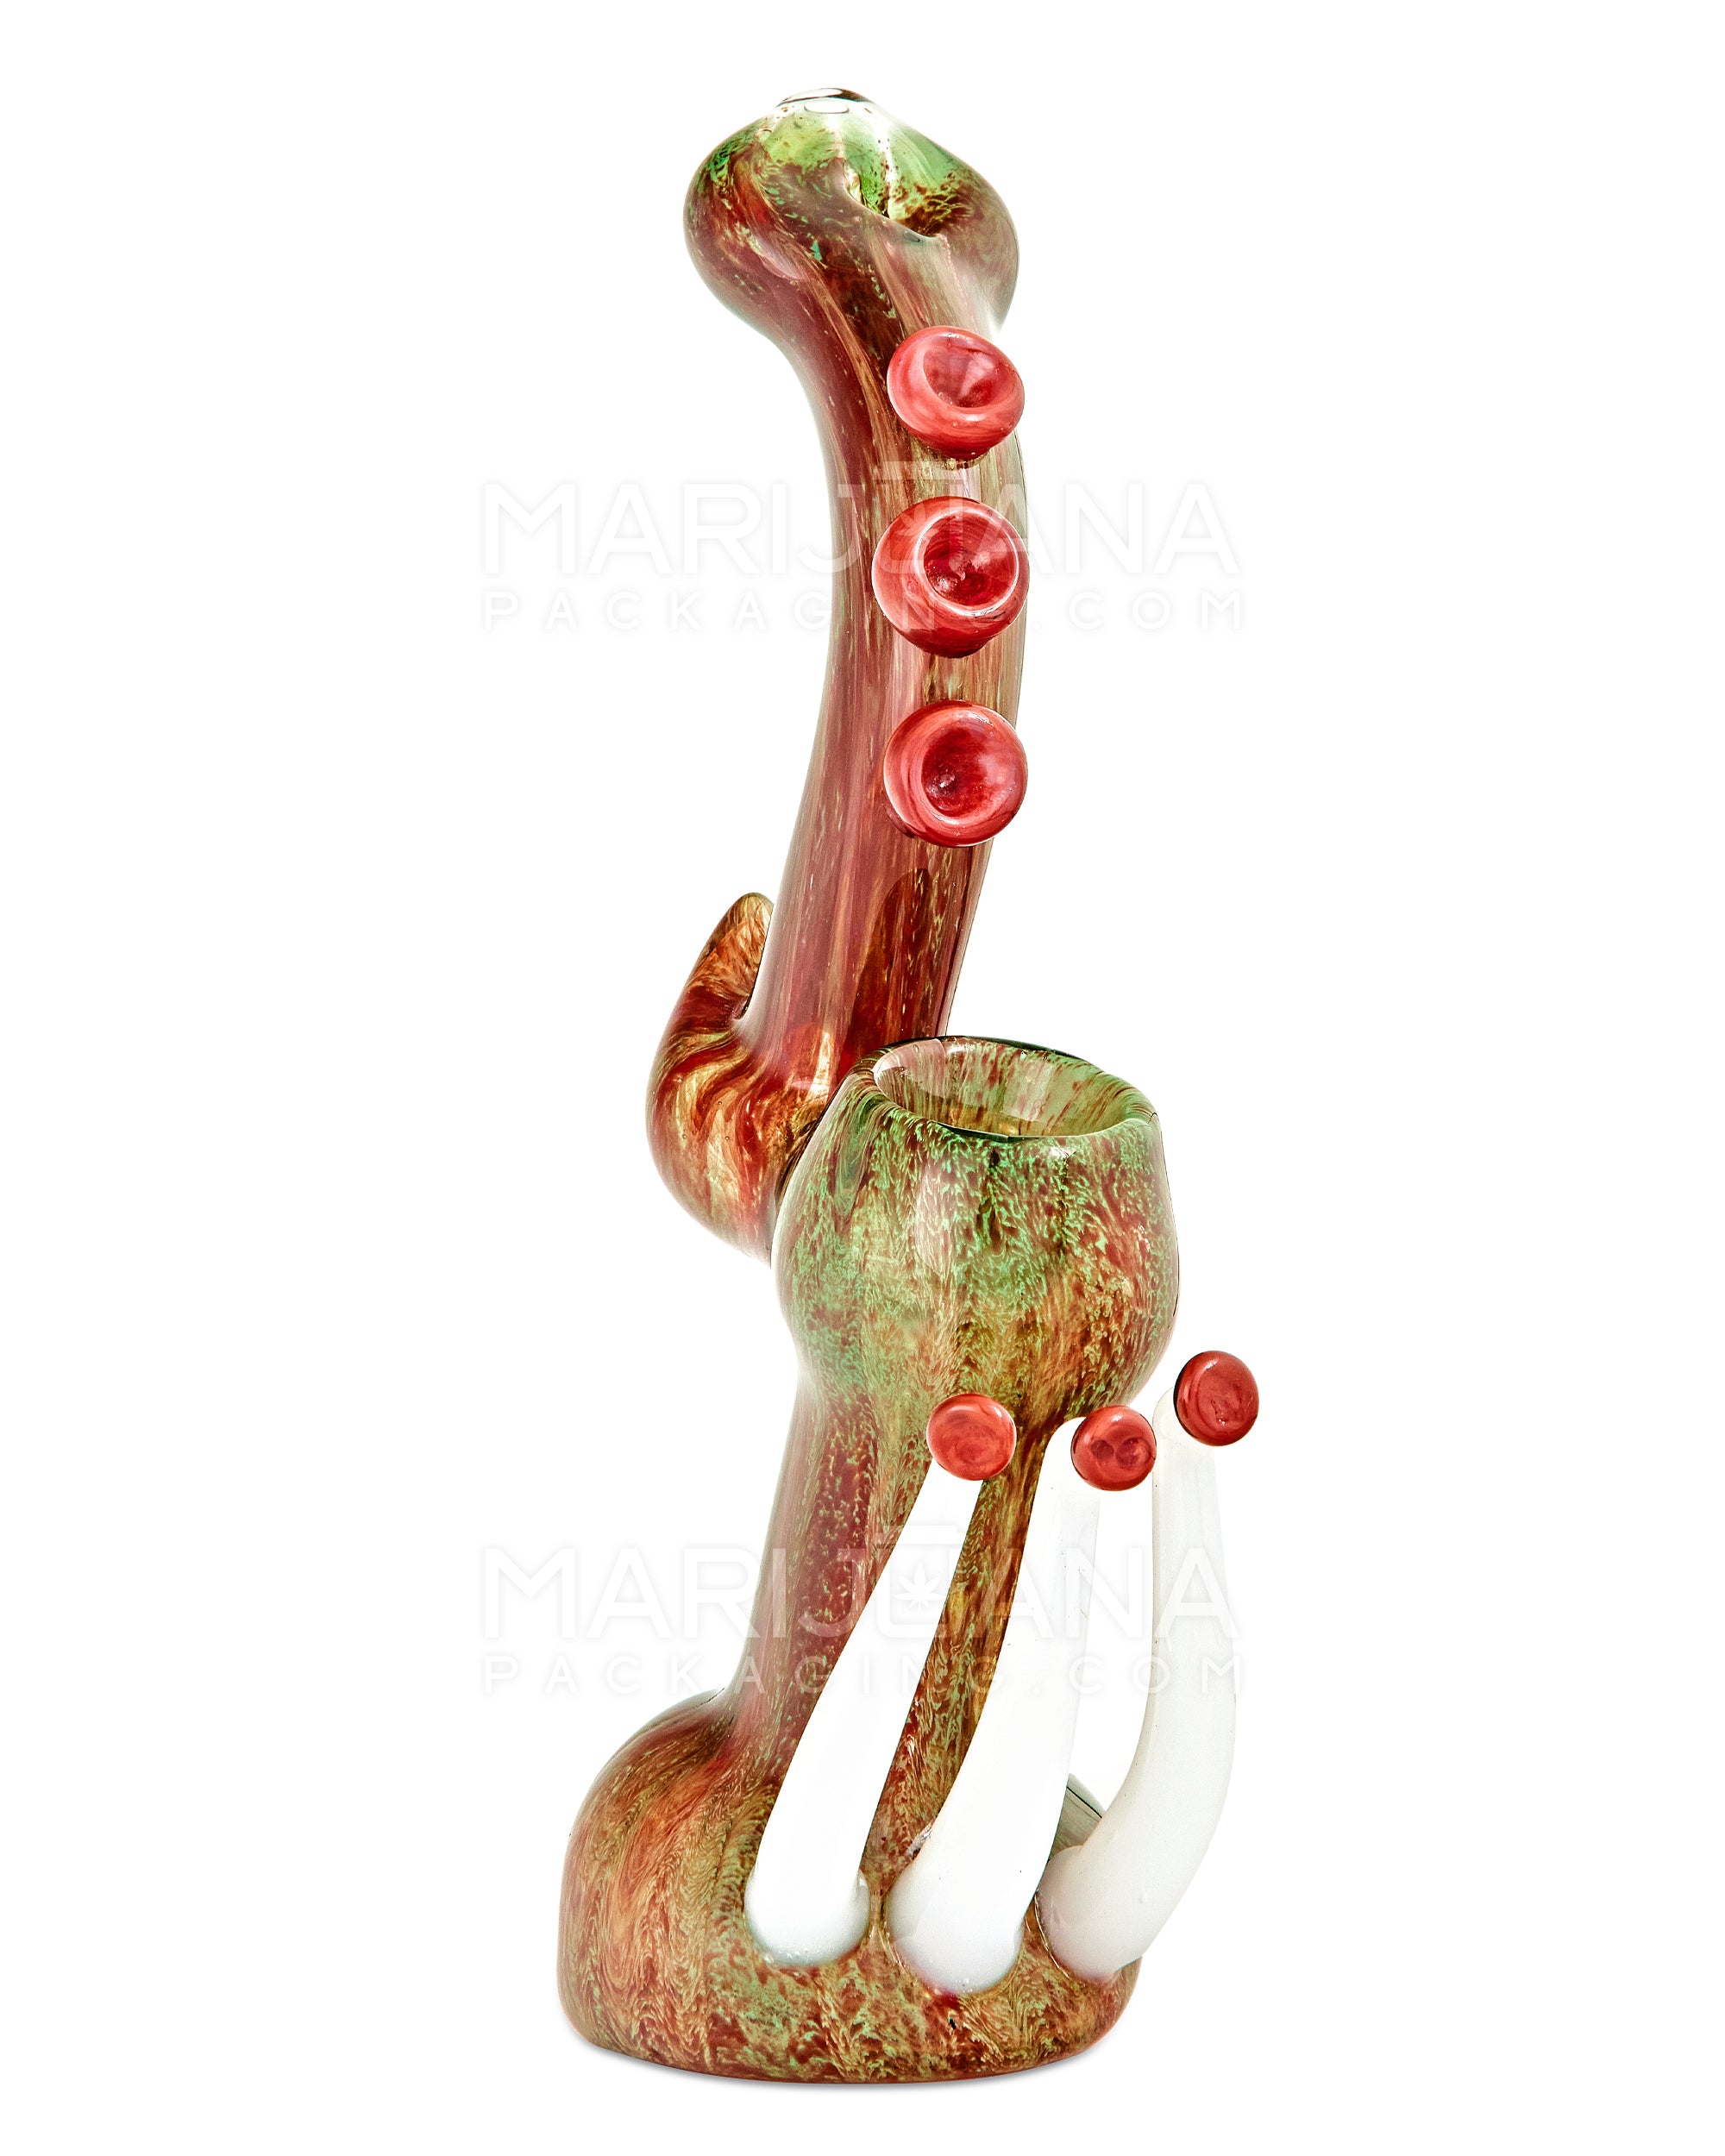 Heady | Donut Mouth Color Pull Kraken Bubbler w/ Triple Tentacles | 9in Tall - Glass - Red & Green - 1